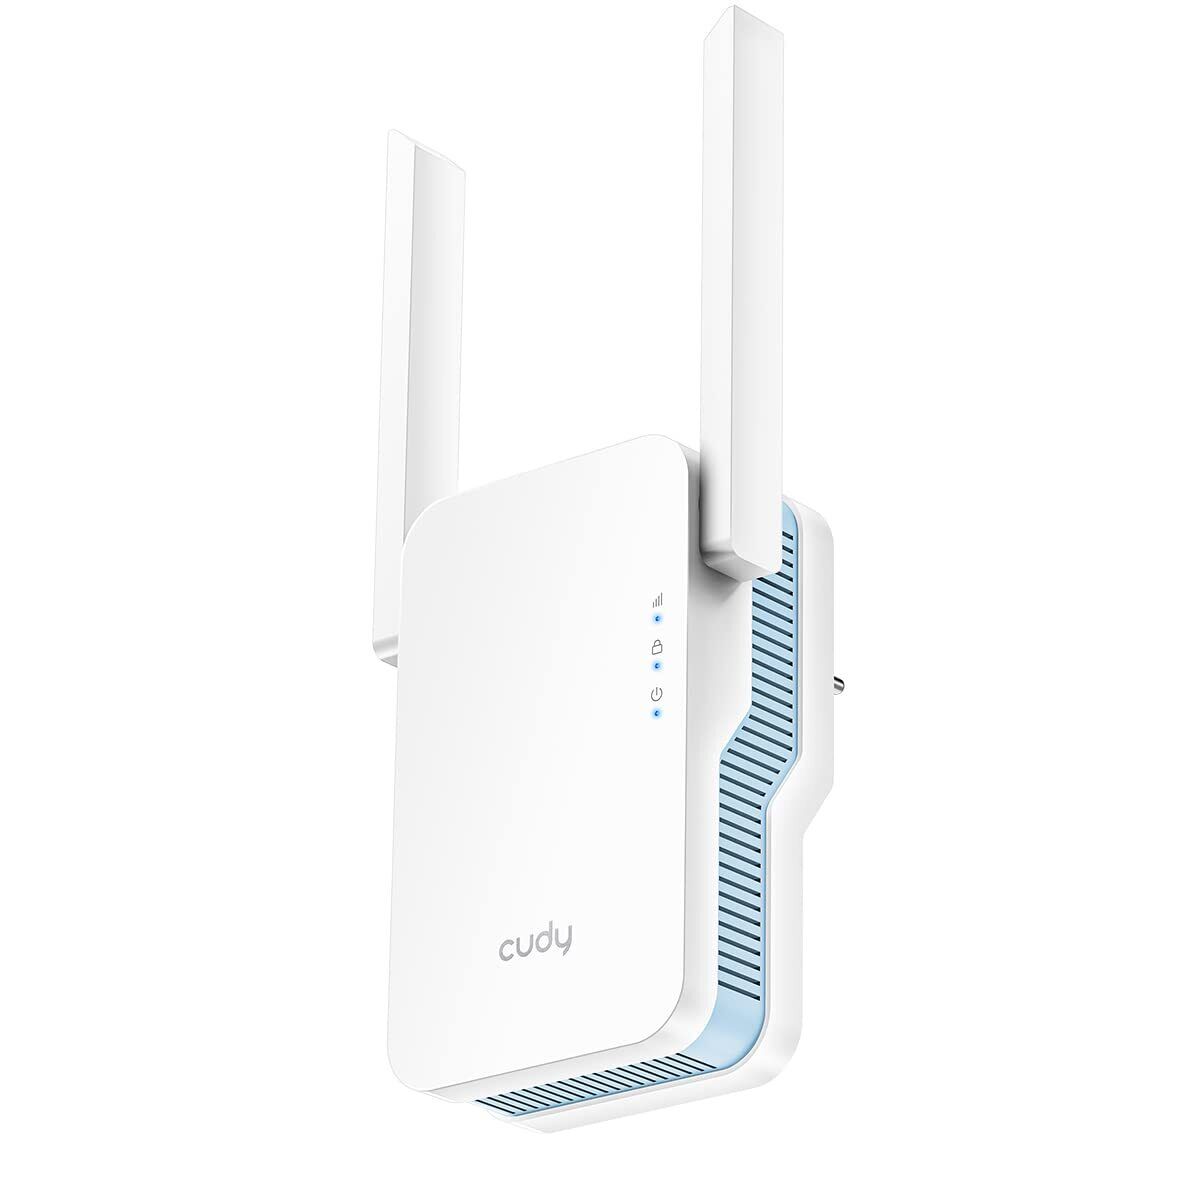 New AC1200 Mesh WiFi Extender, Up to 1200Mbps Dual Band WiFi Range Extender, ...